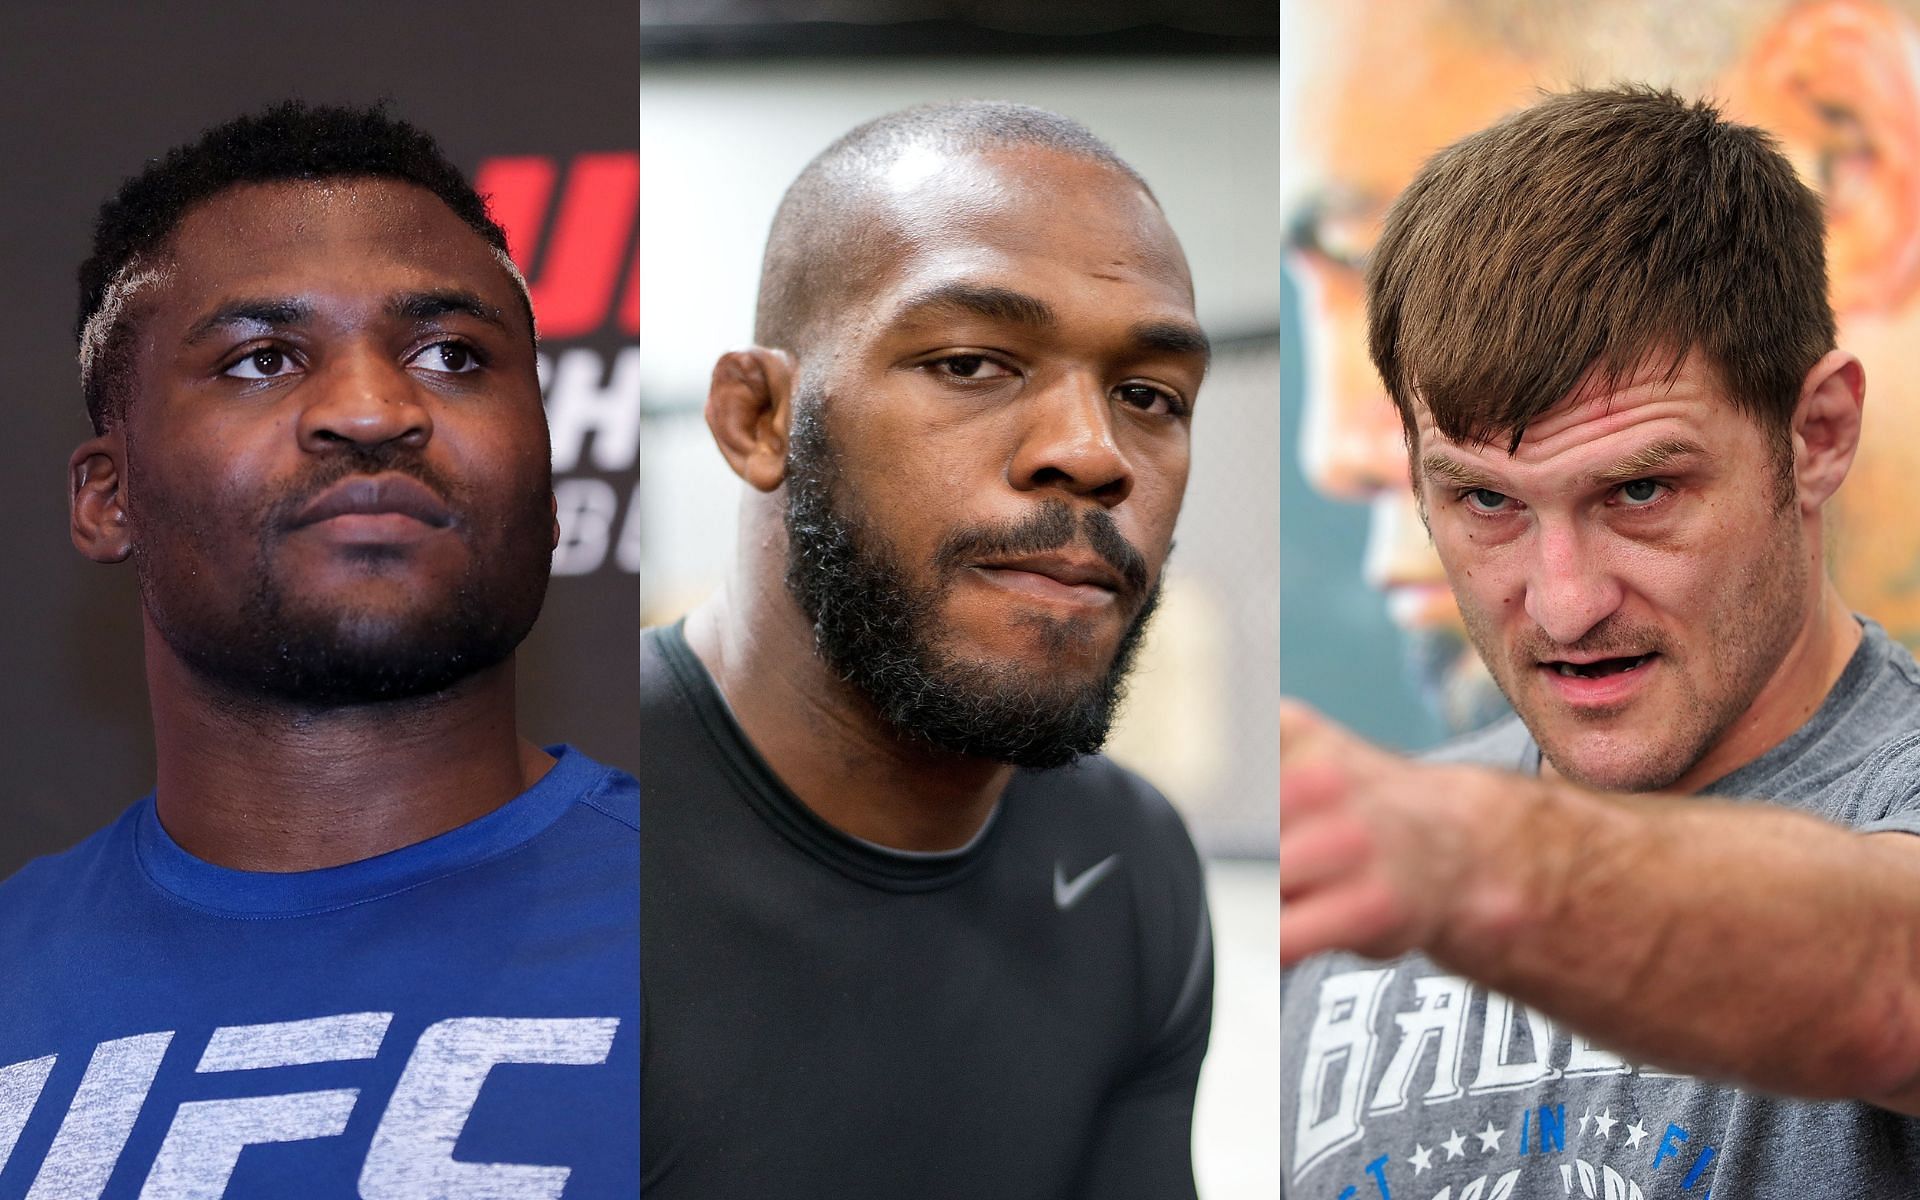 Francis Ngannou (Left), Jon Jones (Middle), and Stipe Miocic (Right)